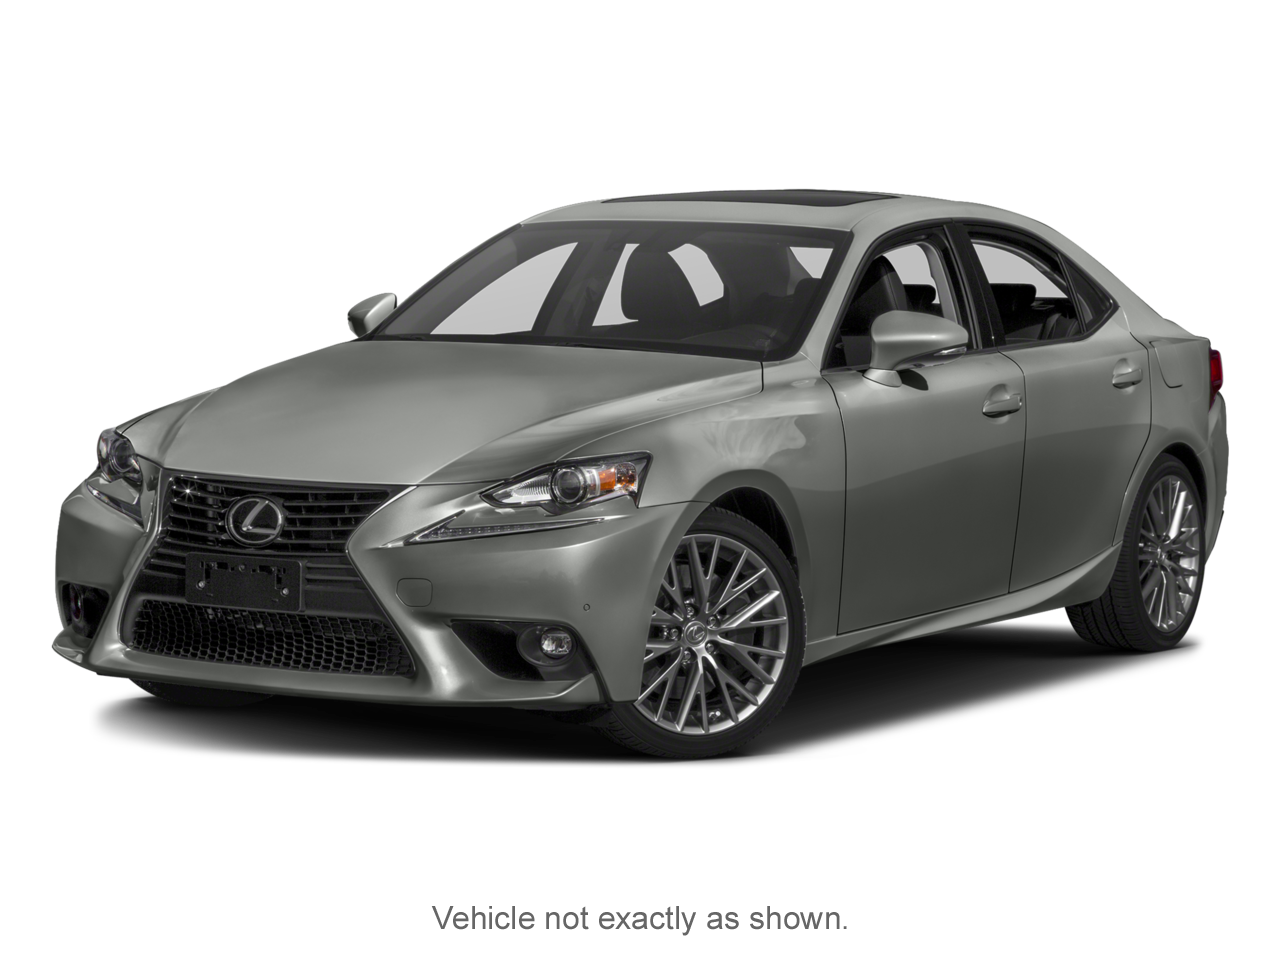 2016 Lexus IS 300 AWD AWD | Low Mileage | New Tires | Local Vehicle